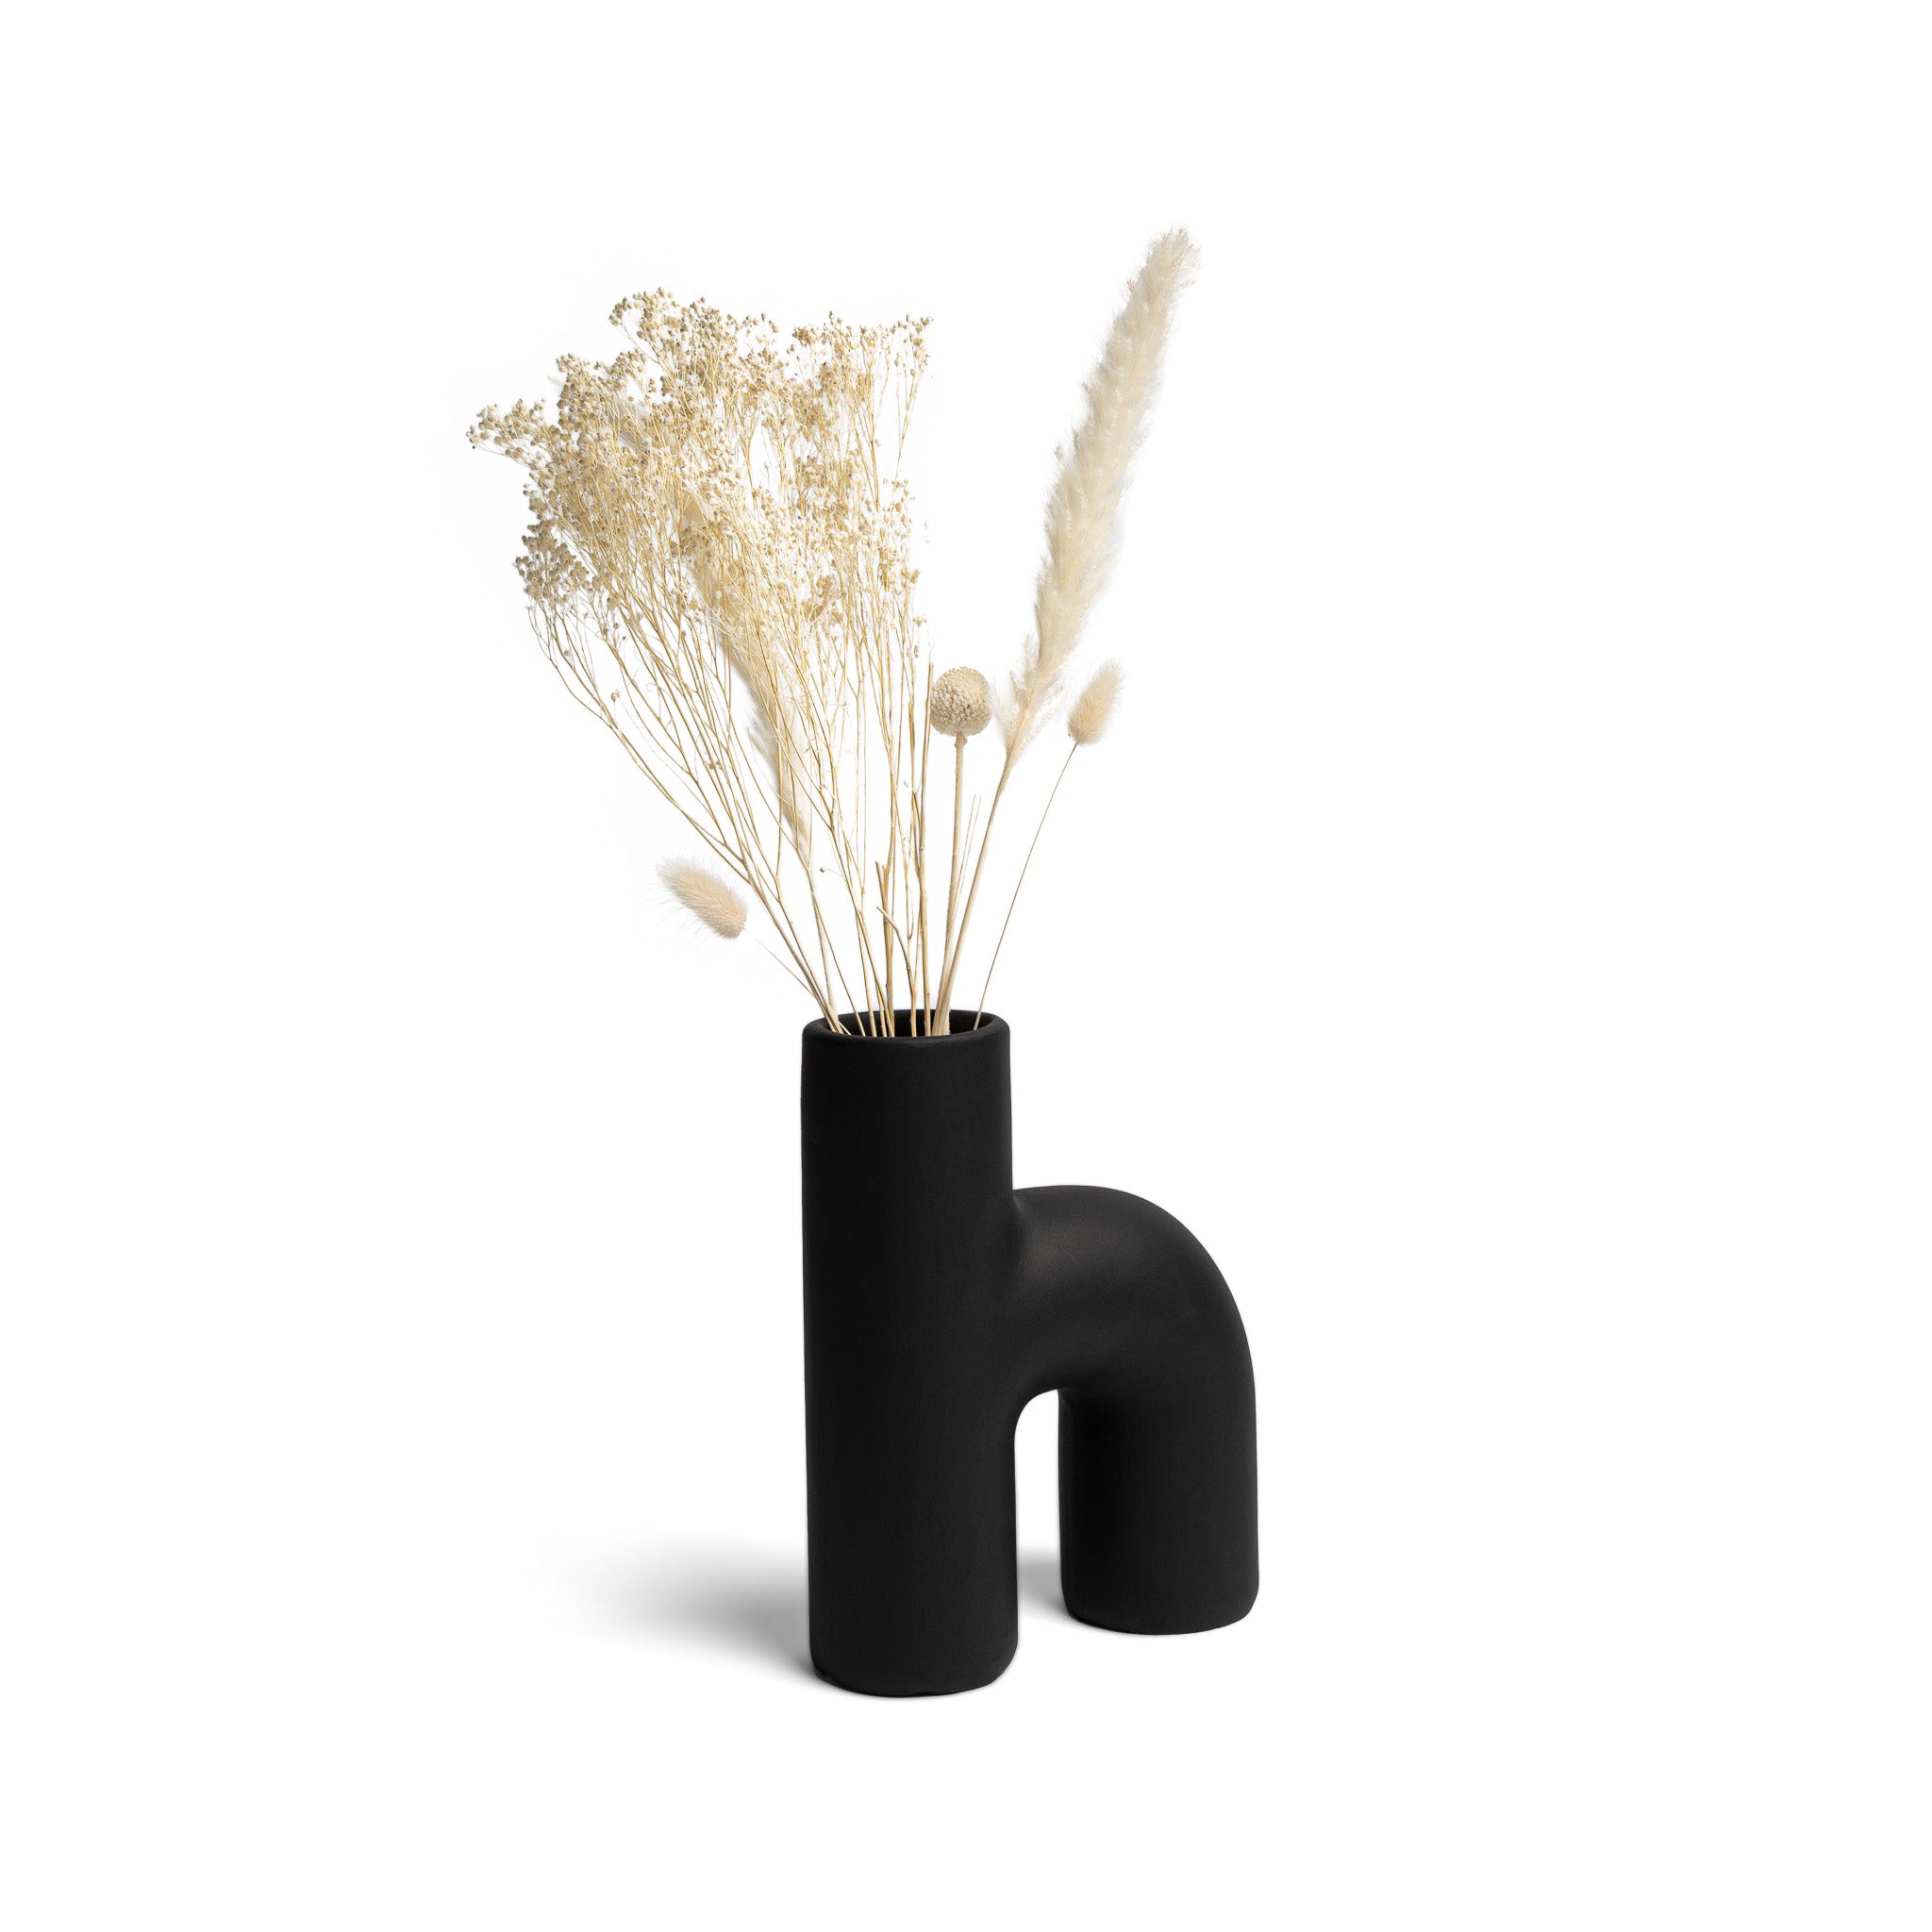 Lila Abstract Sculptural Decorative Modern Vase in Black in Decorative by Maven Lane